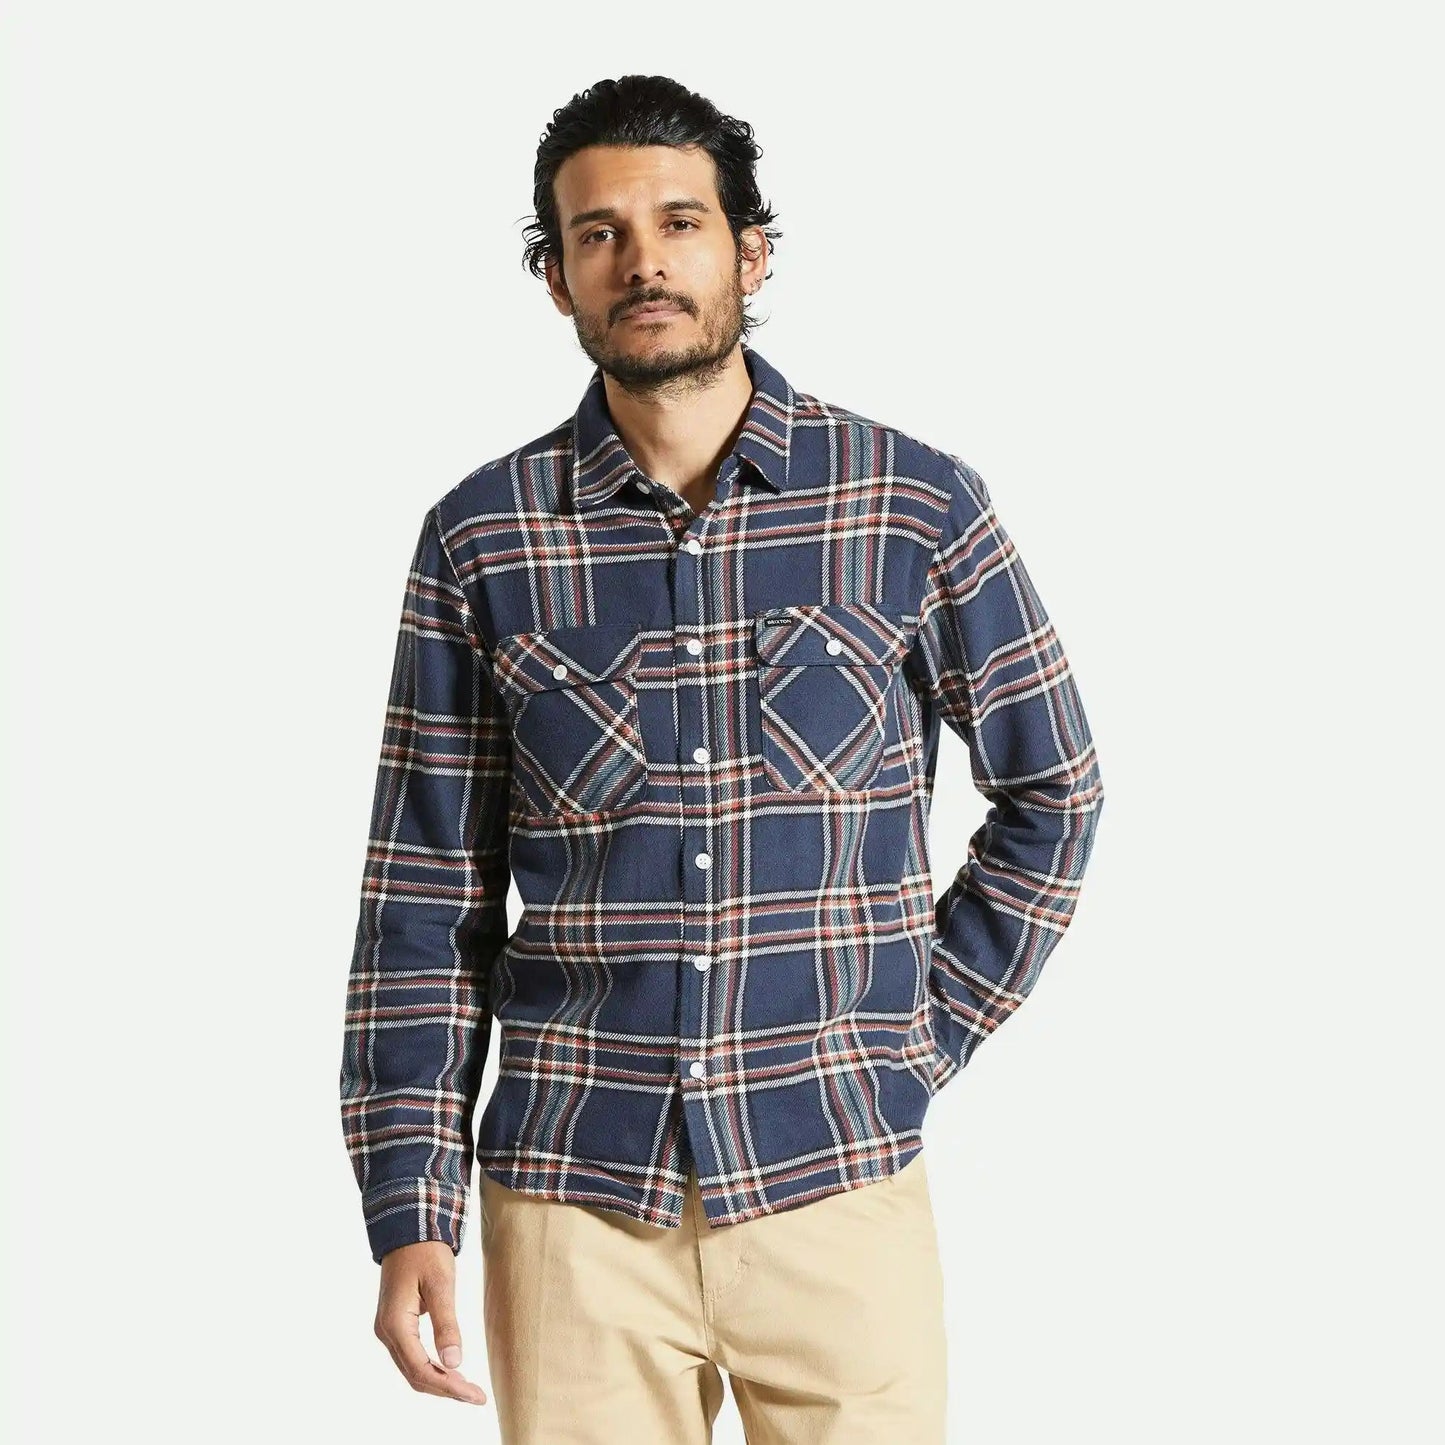 Brixton Bowery Flannel Shirt, washed navy/off white/terracot - Tiki Room Skateboards - 2